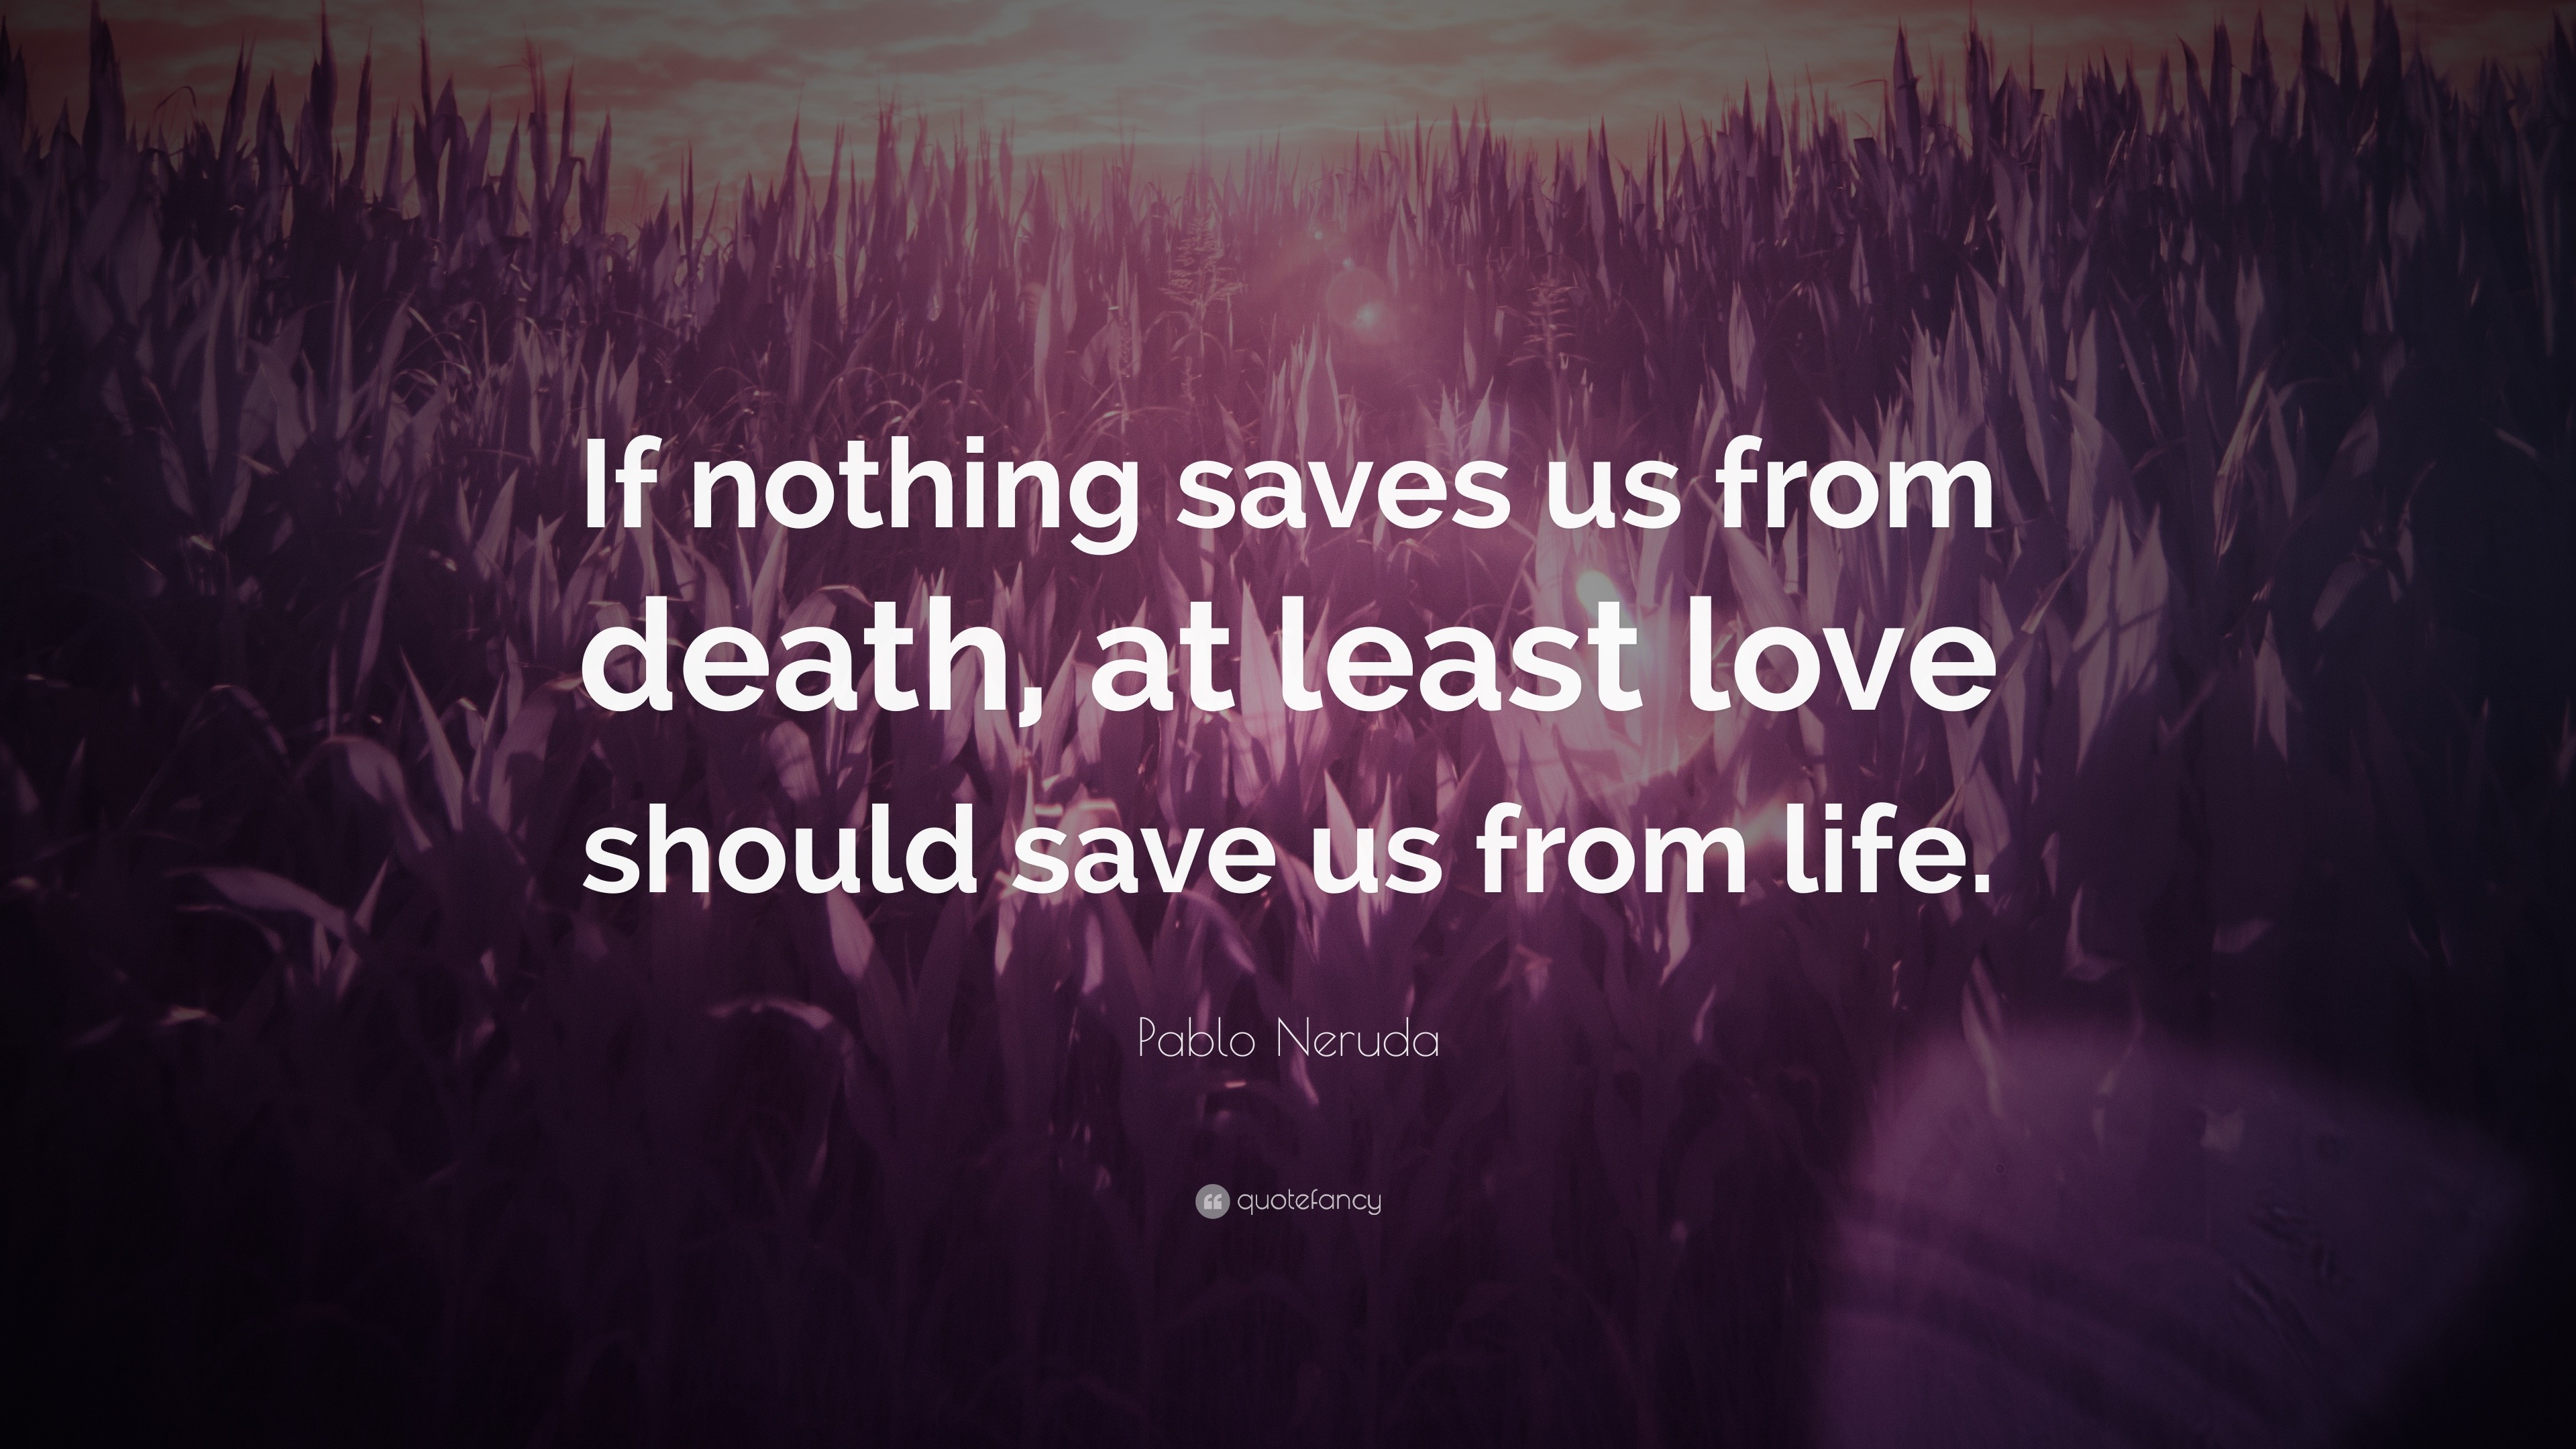 Pablo Neruda Quote “If nothing saves us from at least love should